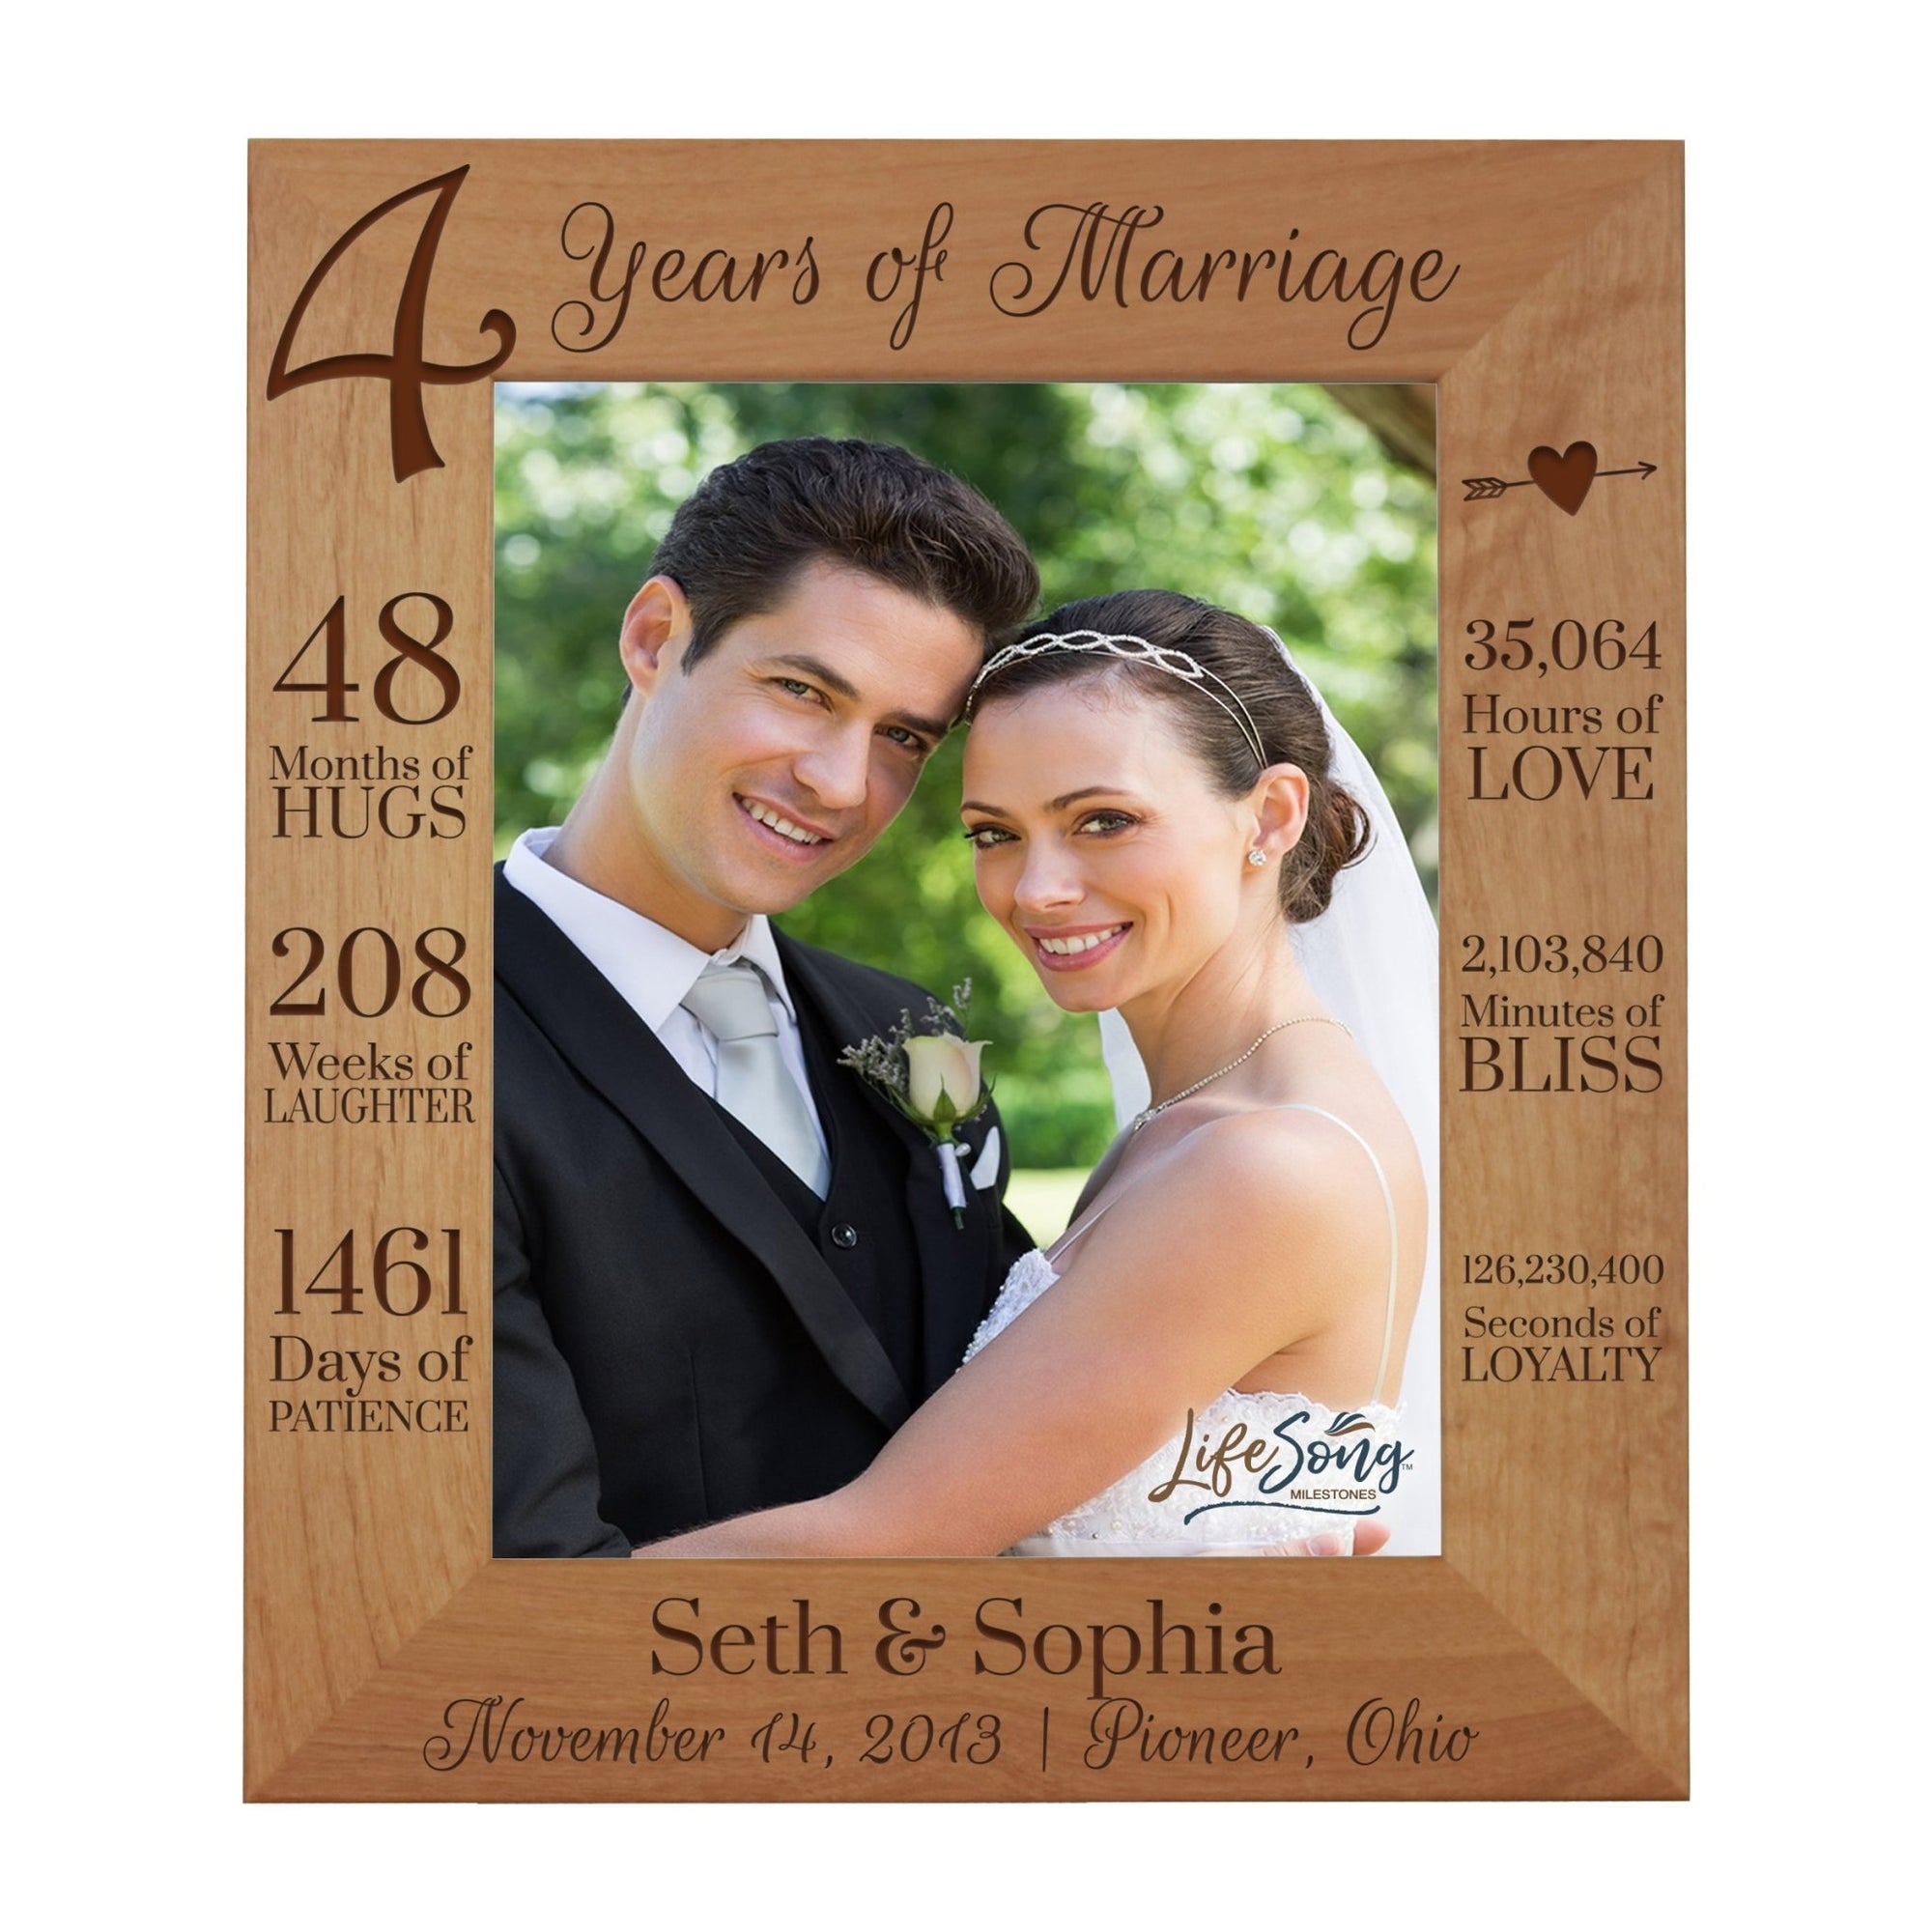 Personalized Couples 4th Wedding Anniversary Photo Frame Home Decor Gift Ideas